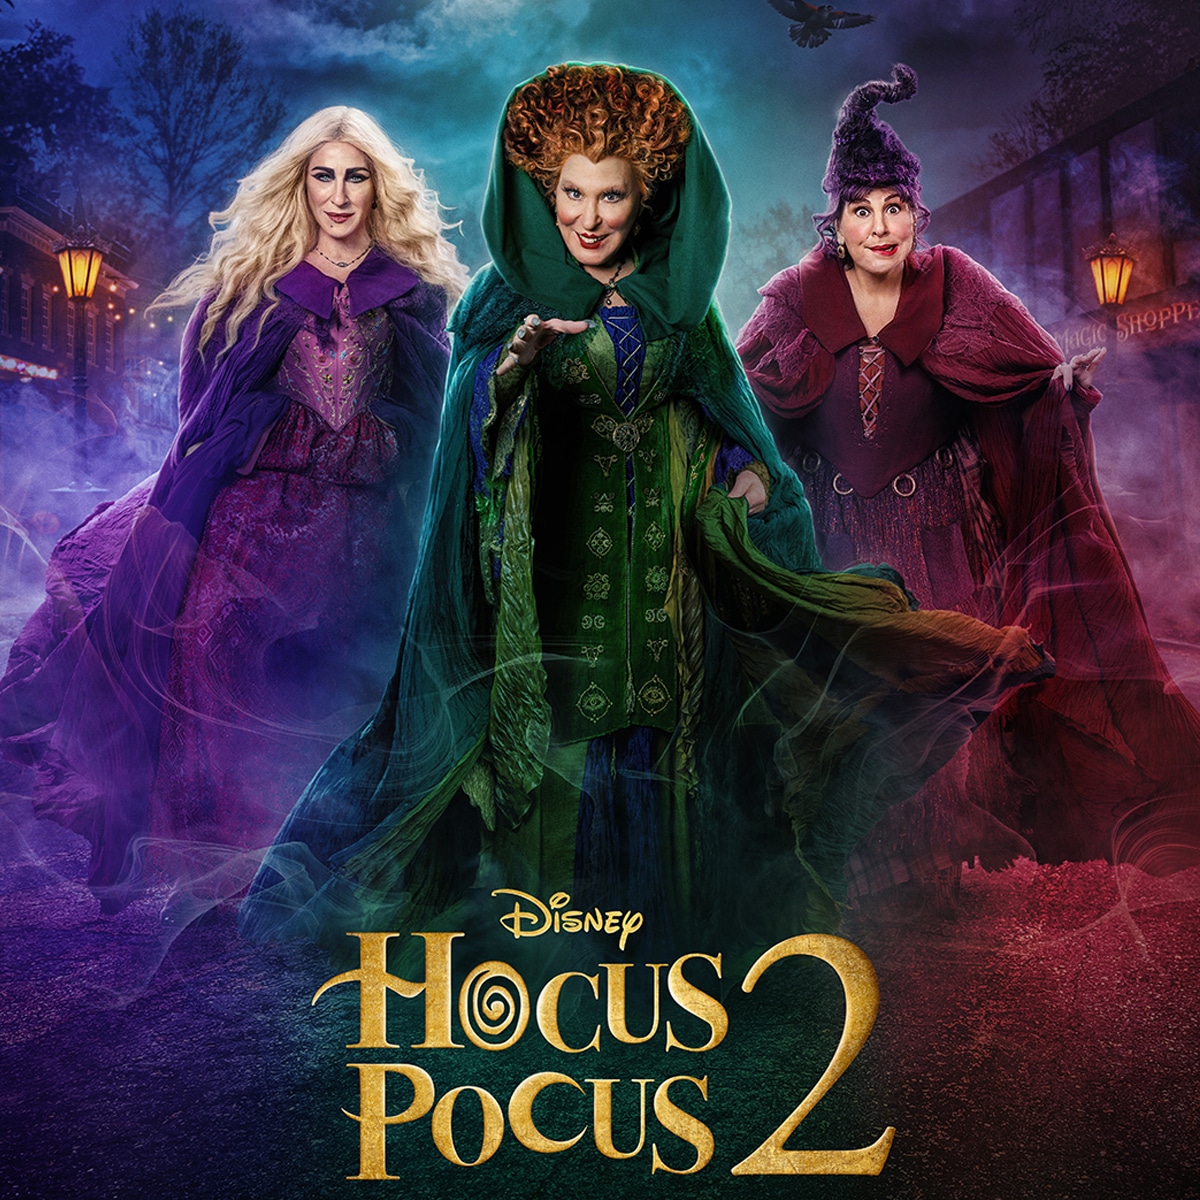 Hocus Pocus 2 Photo Shows The Sanderson Sisters Return to Town! Online